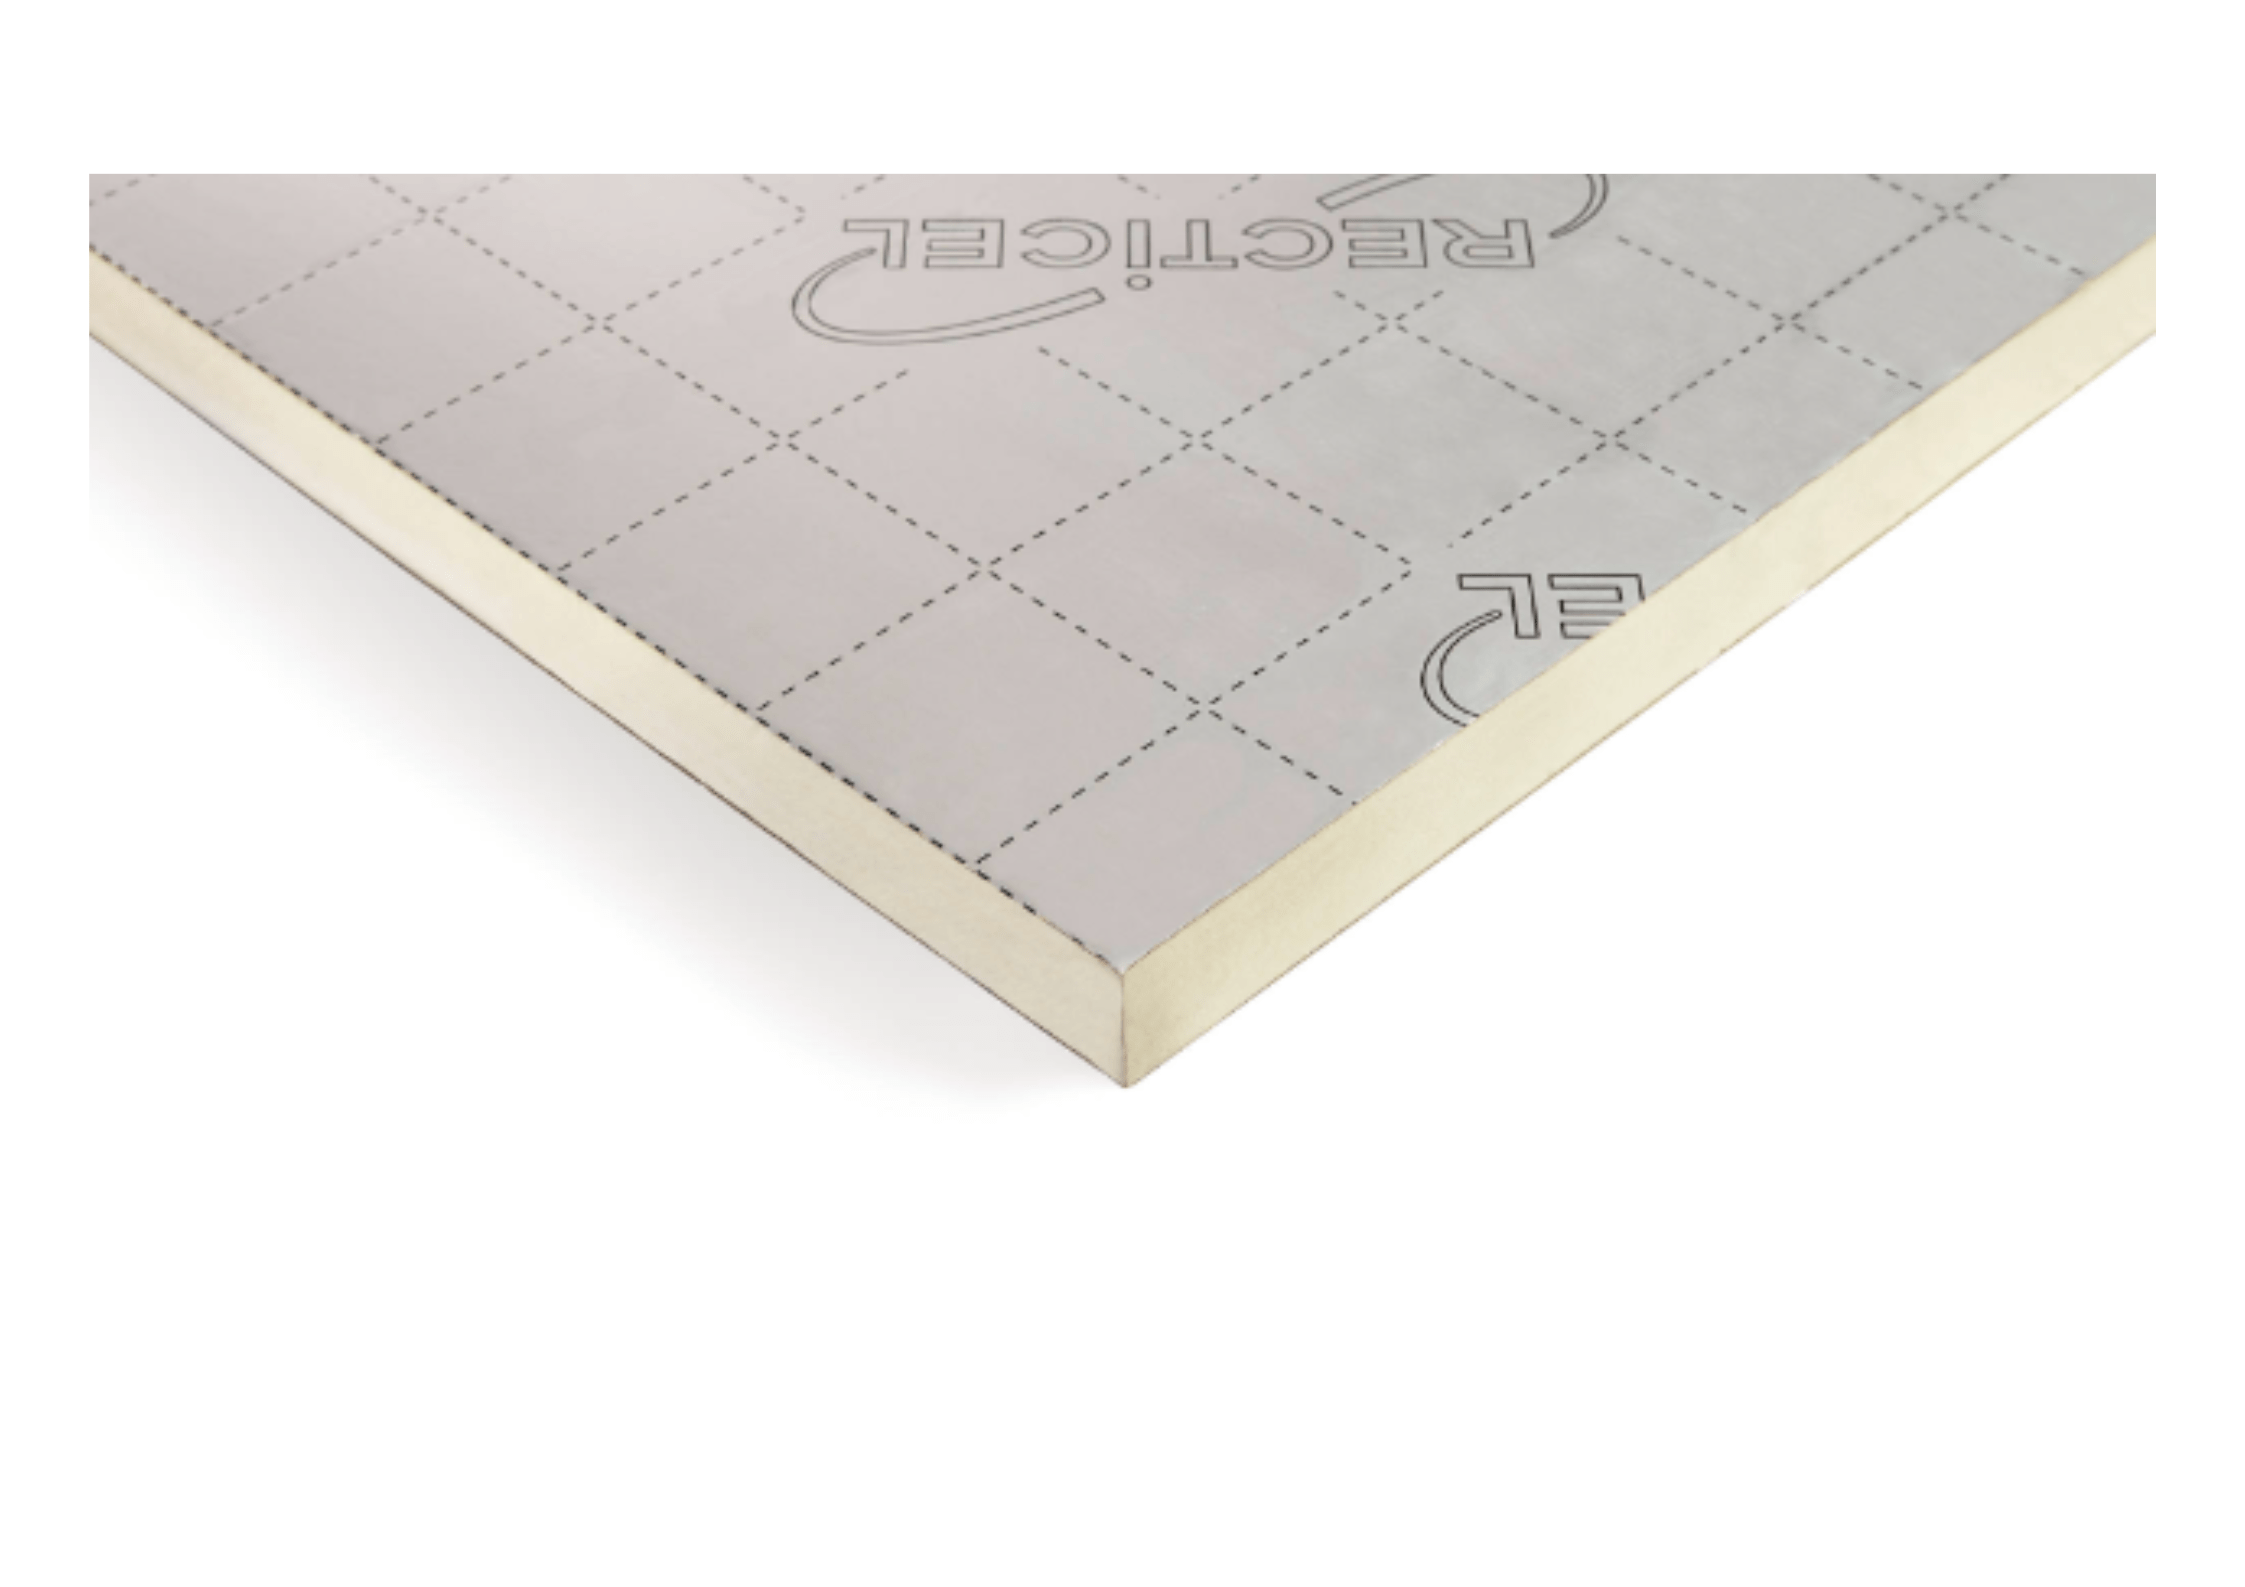 Recticel Insulation Recticel Eurothane Eurodeck Flat Roof Insulation | 2400 x 1200mm